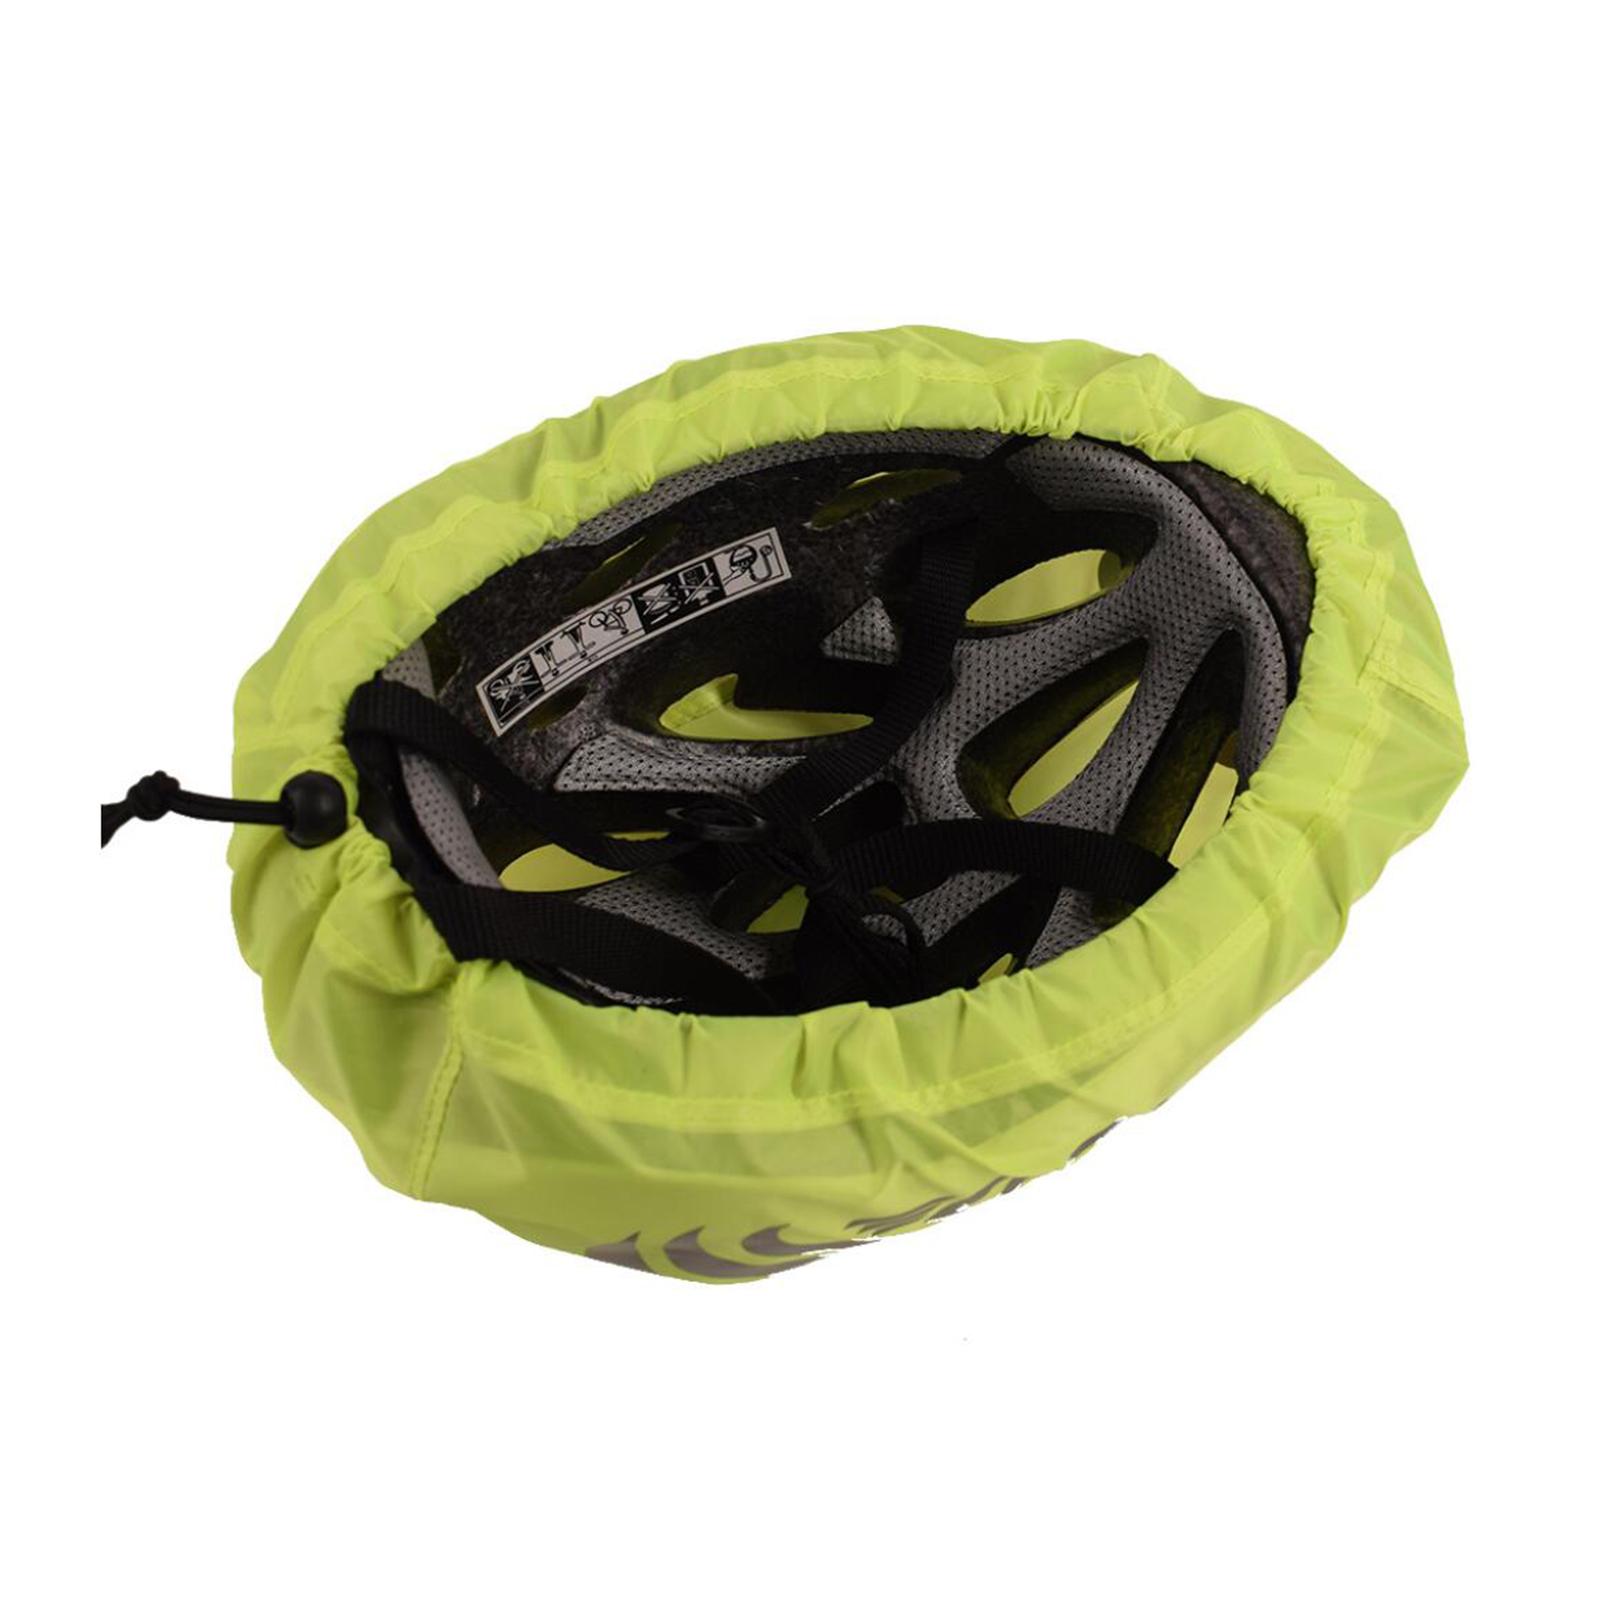 Waterproof Cycling Helmet Cover Reflective Strip Protect Fluorescent Green 1